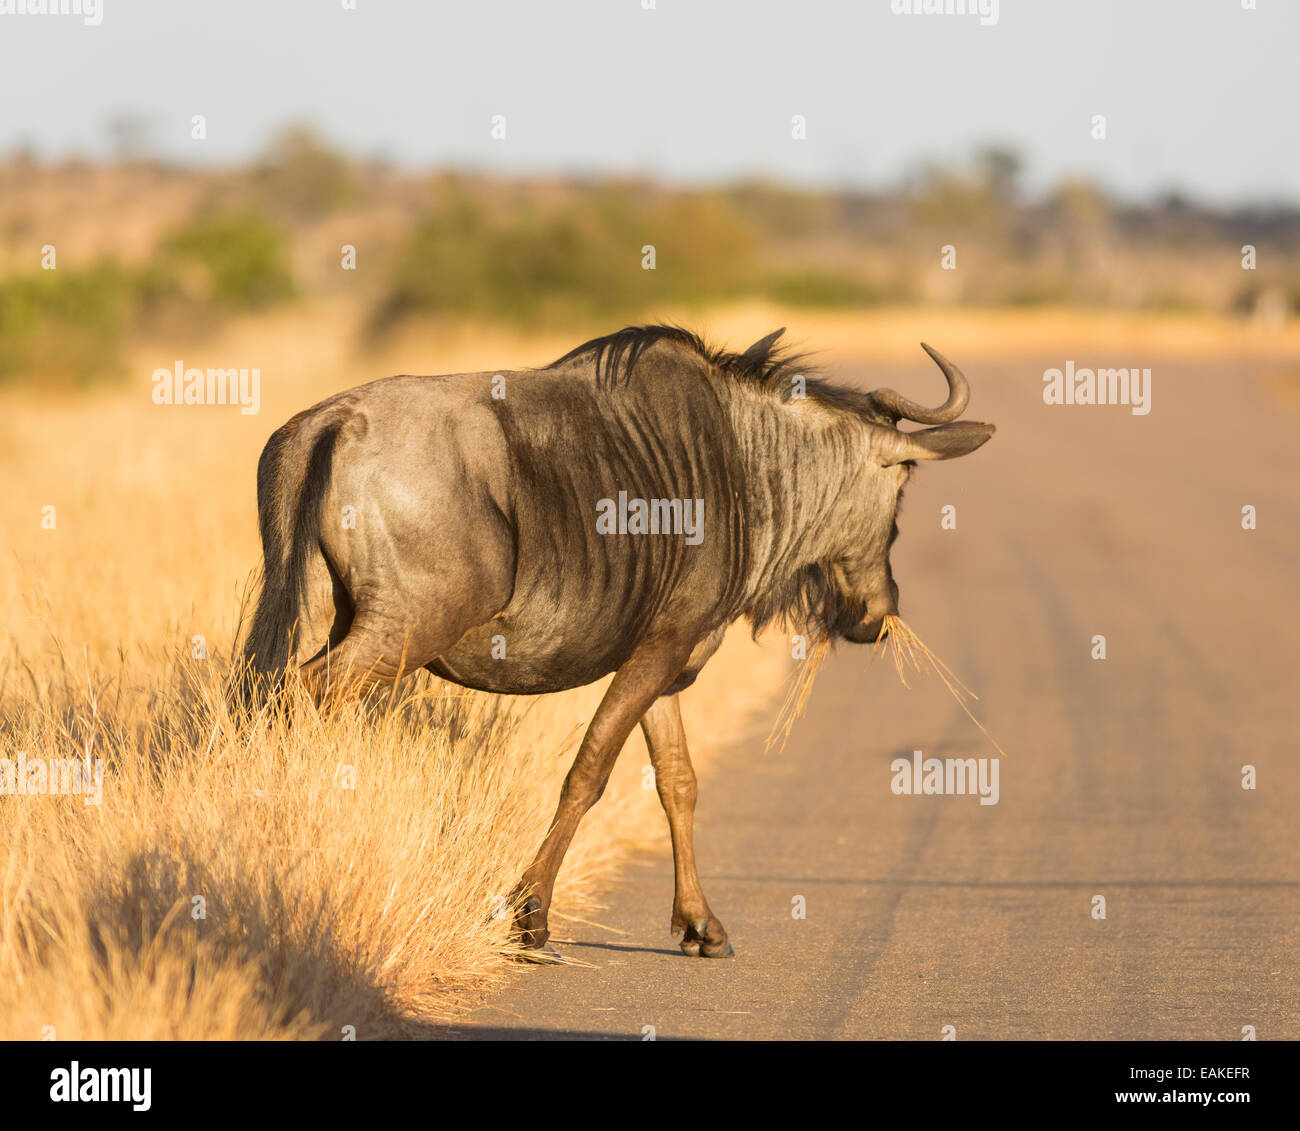 KRUGER NATIONAL PARK, SOUTH AFRICA - Blue Wildebeest crossing road Stock Photo